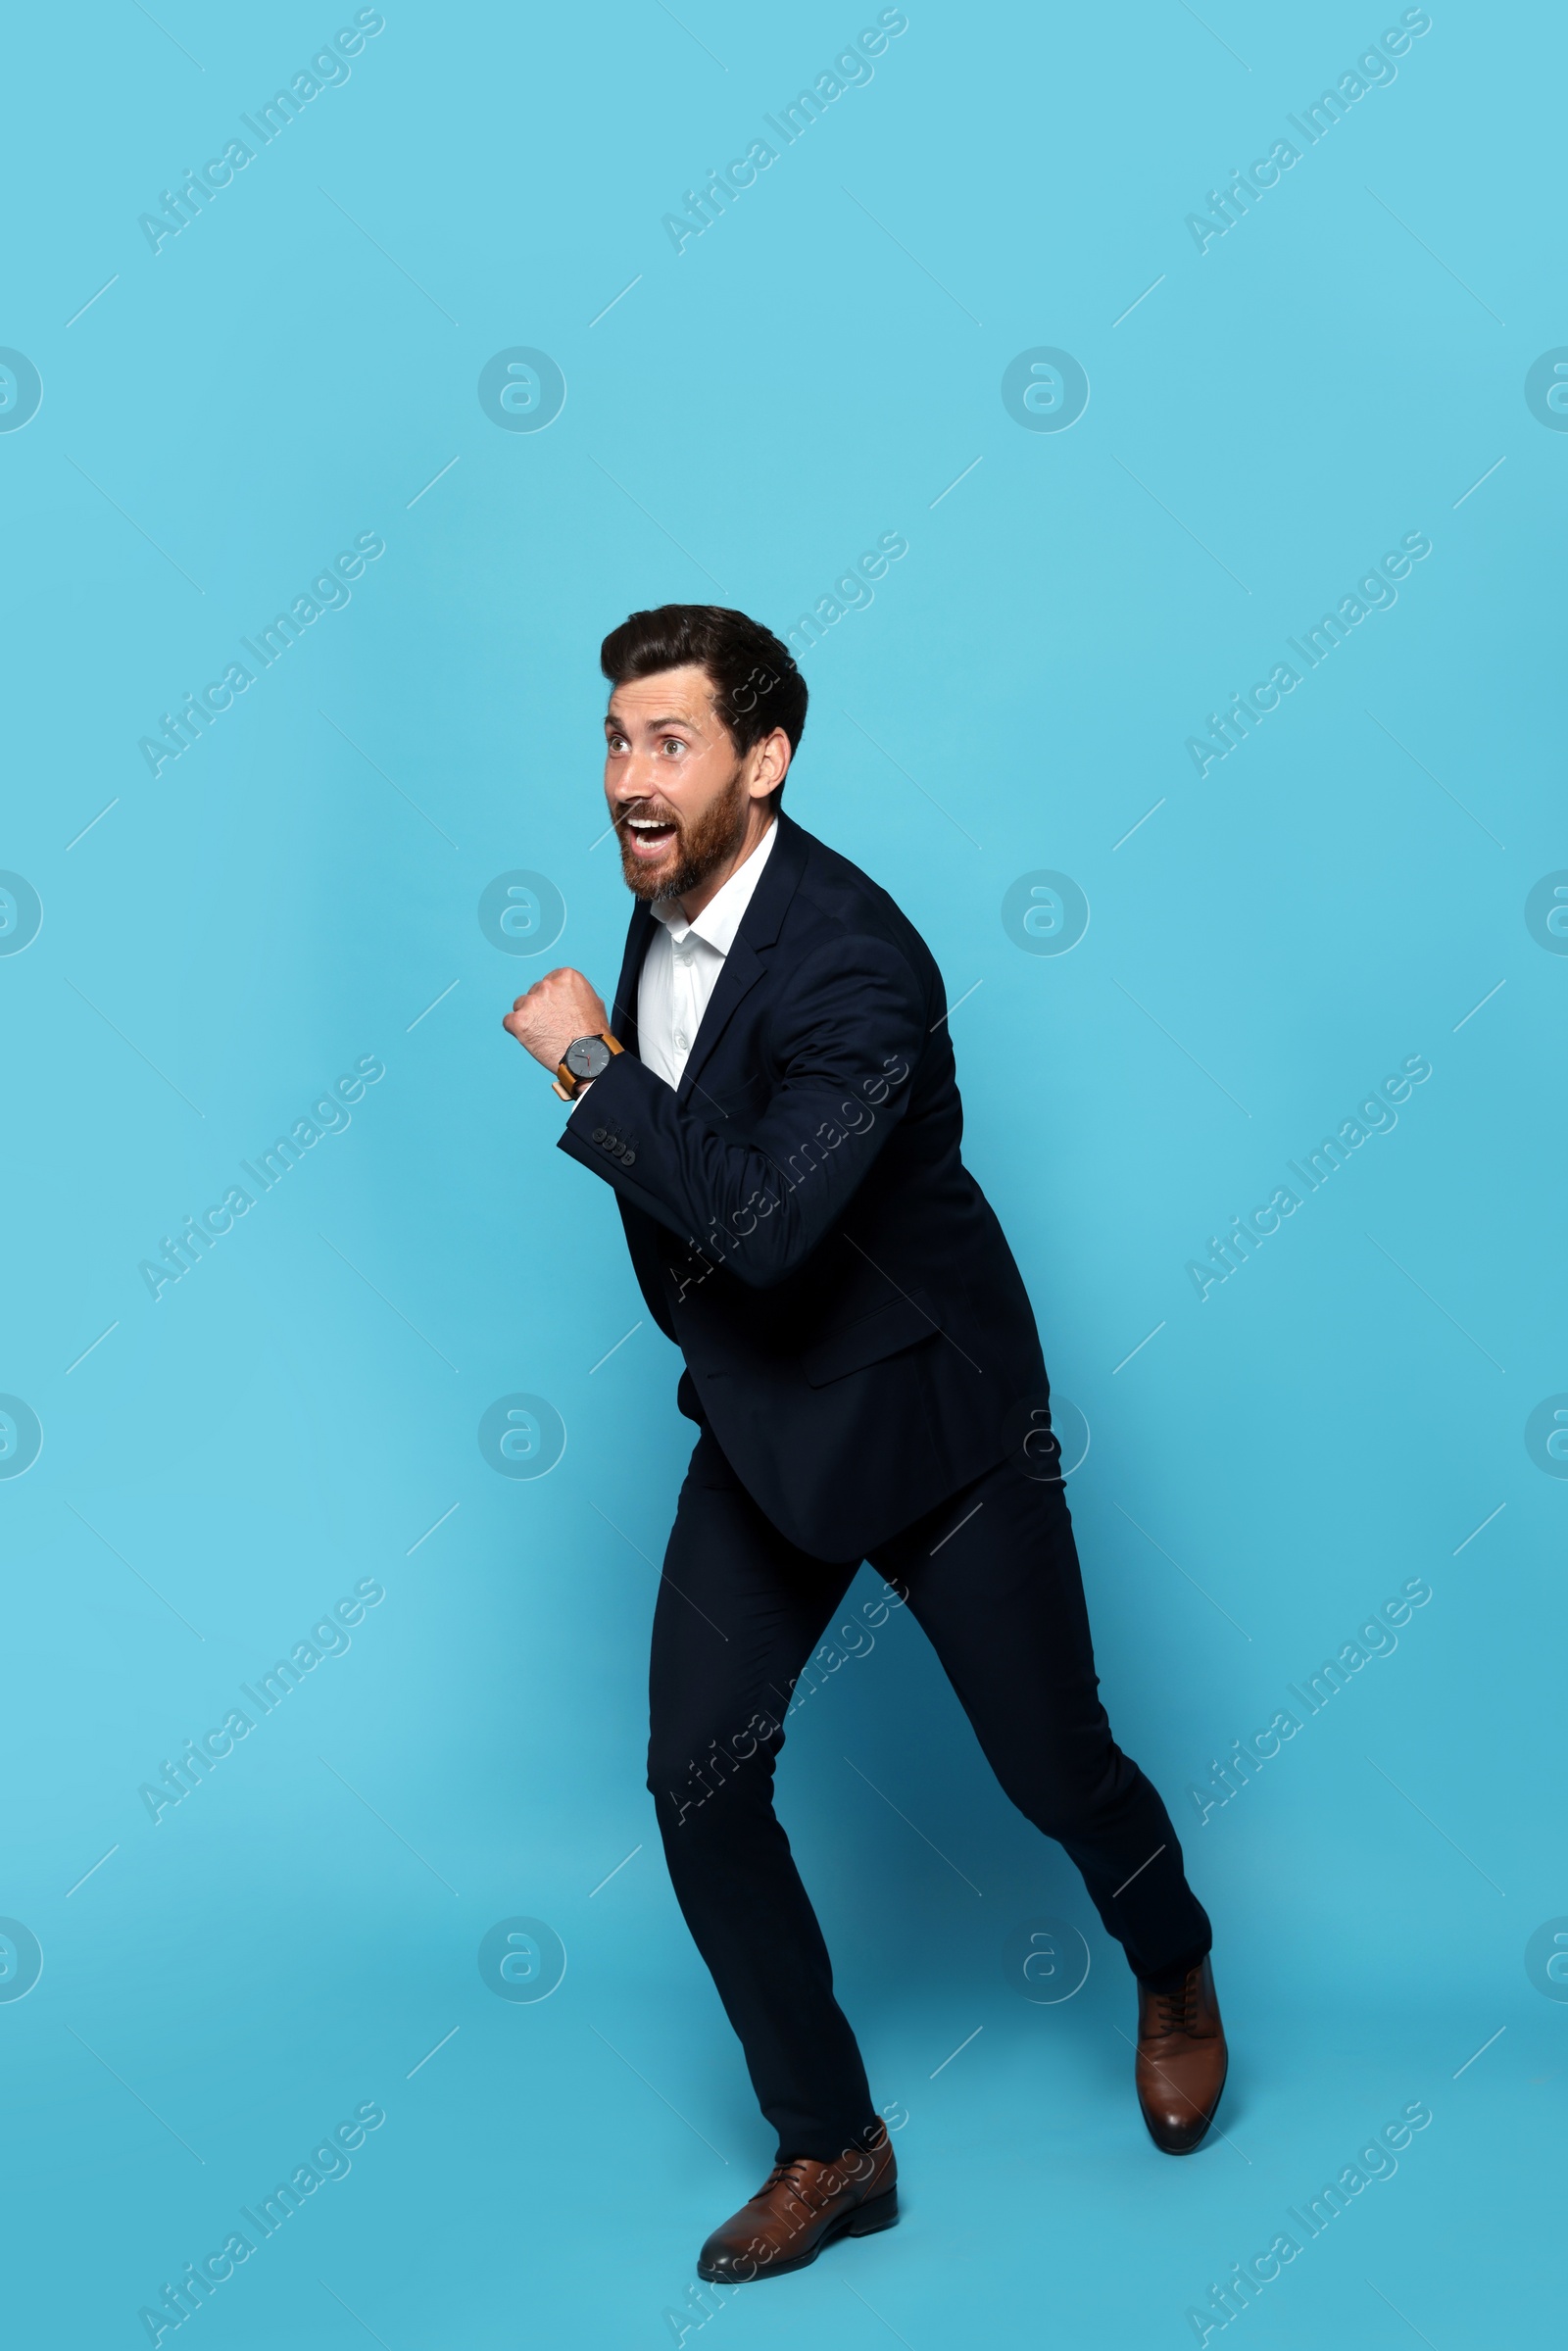 Photo of Handsome bearded man in suit running on light blue background